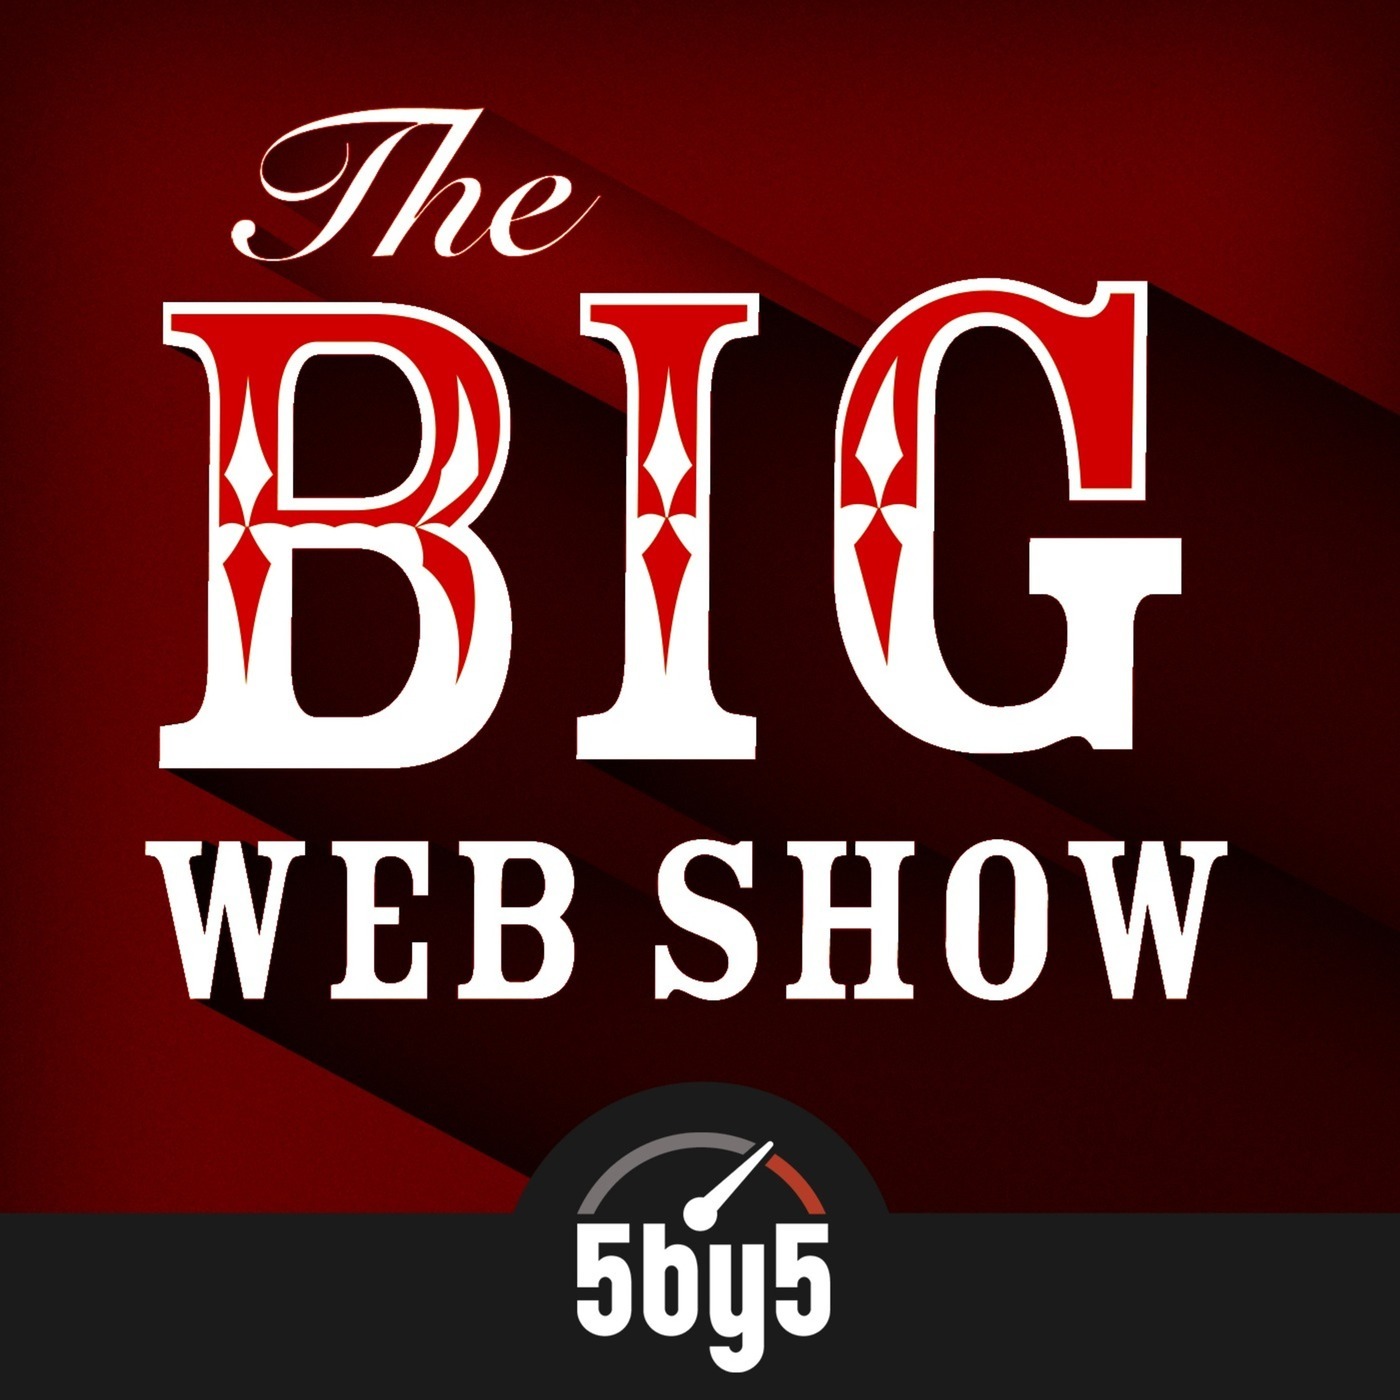 The Big Web Show 2: HTML5 with Jeremy Keith | 5 by 5